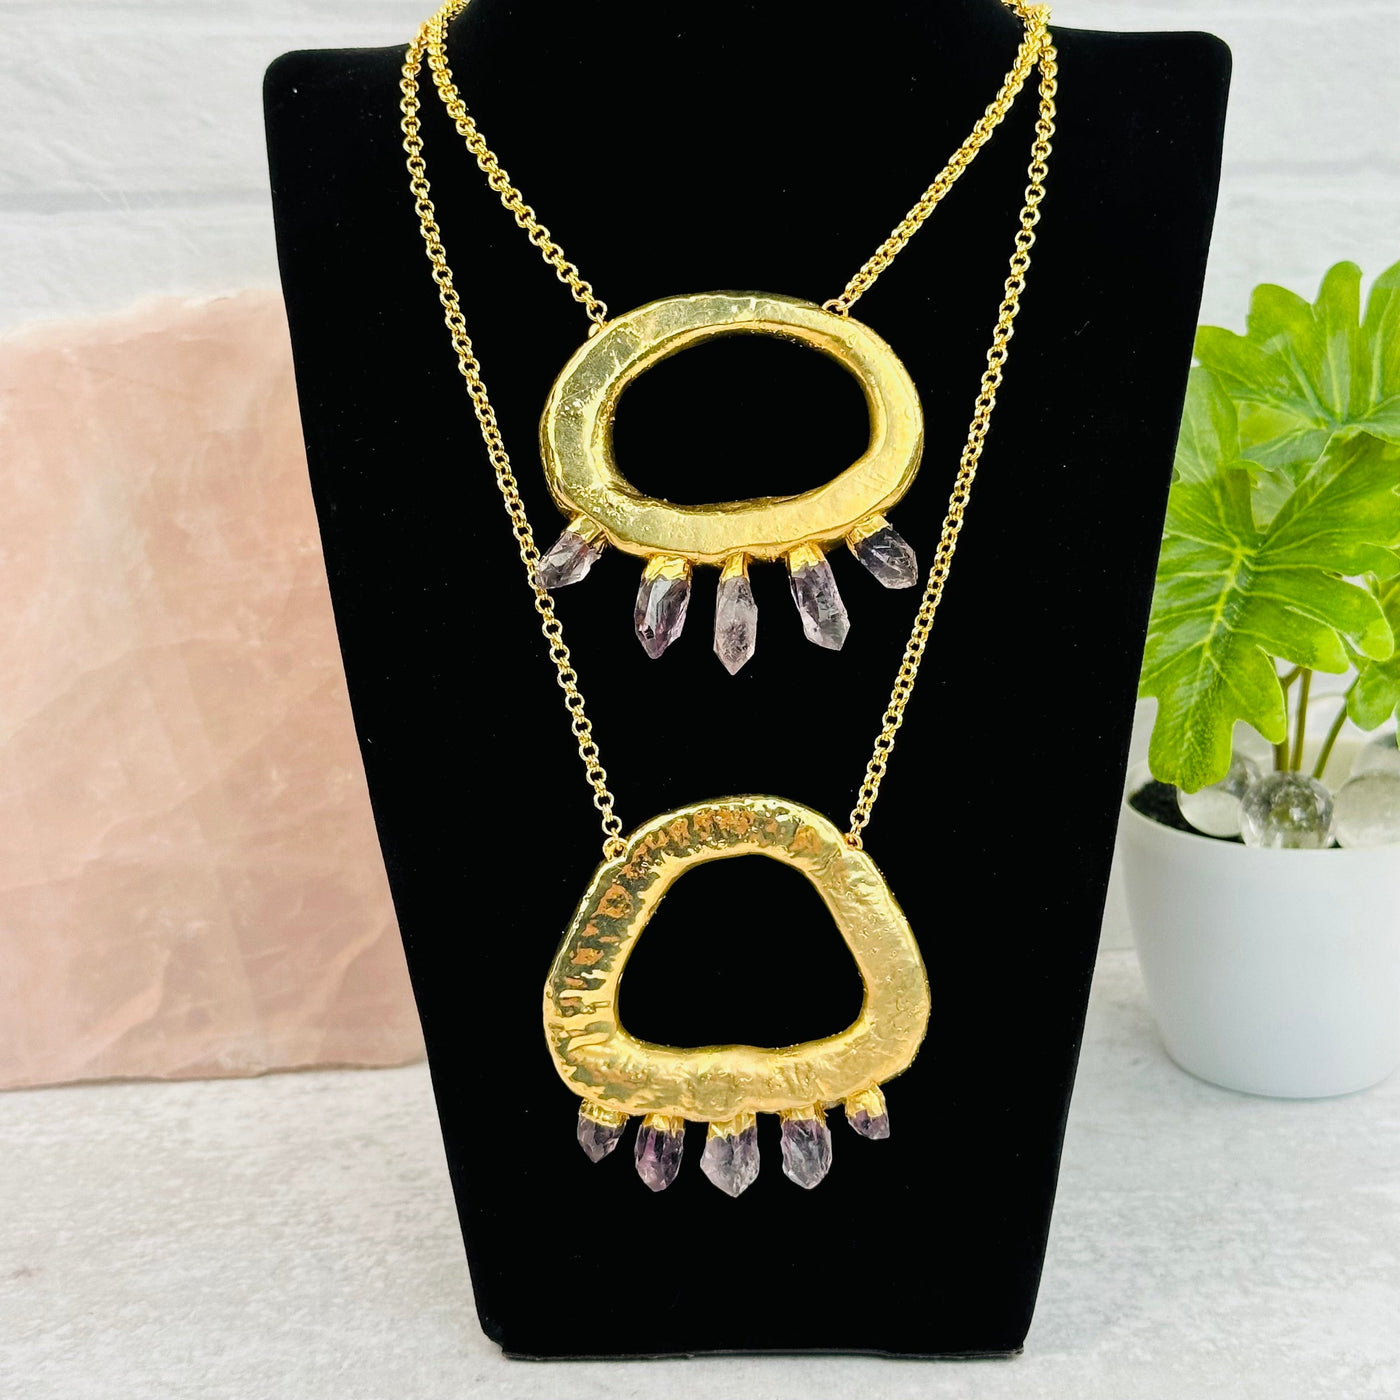 Fancy Amethyst point Necklaces you choose 